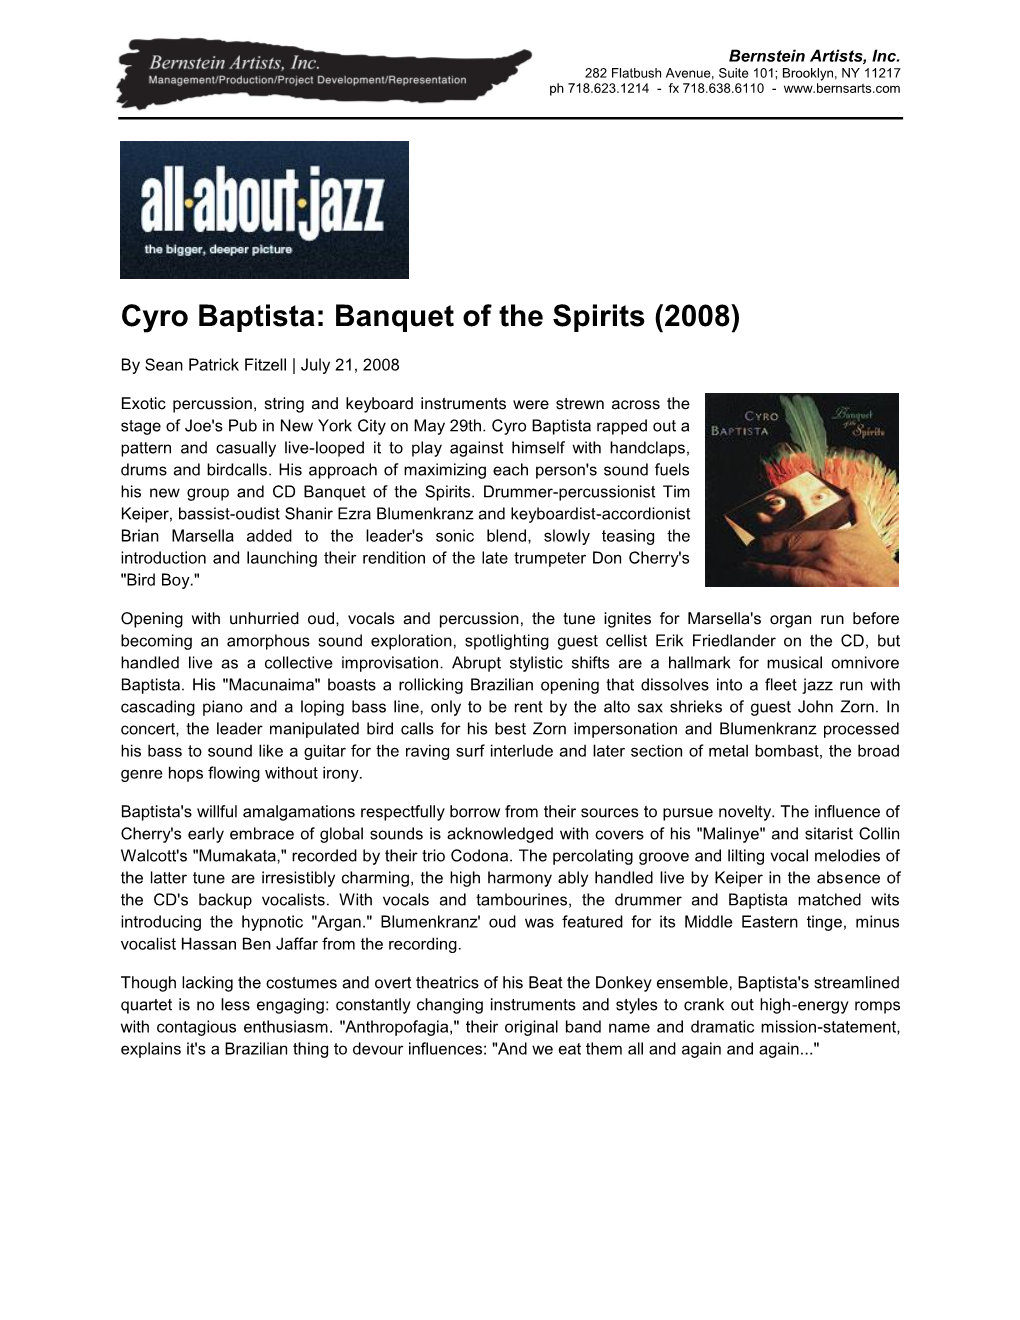 About Jazz on "Banquet of the Spirits"